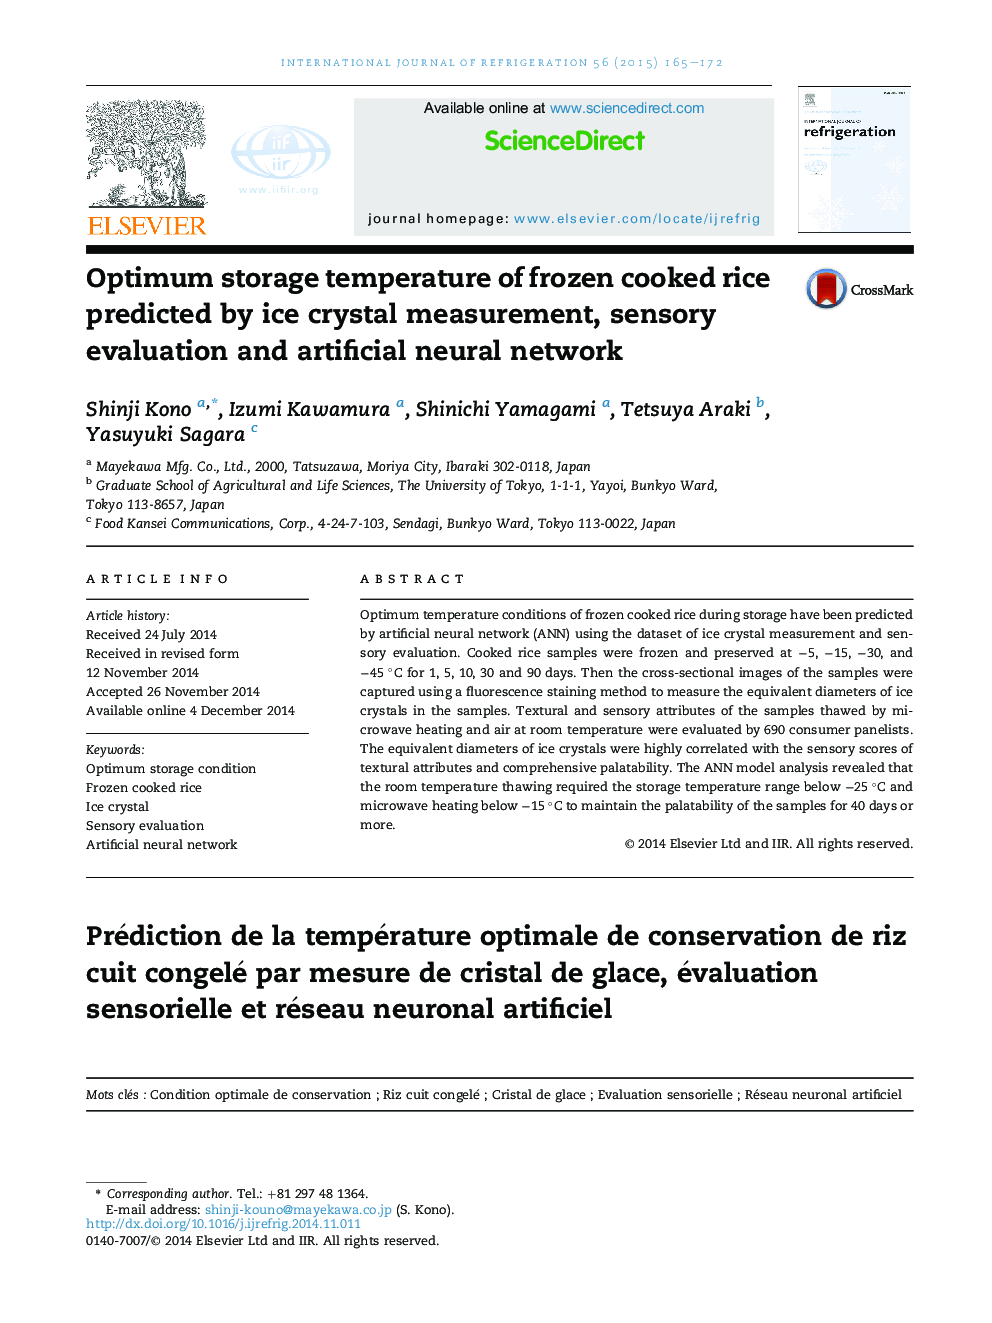 Optimum storage temperature of frozen cooked rice predicted by ice crystal measurement, sensory evaluation and artificial neural network